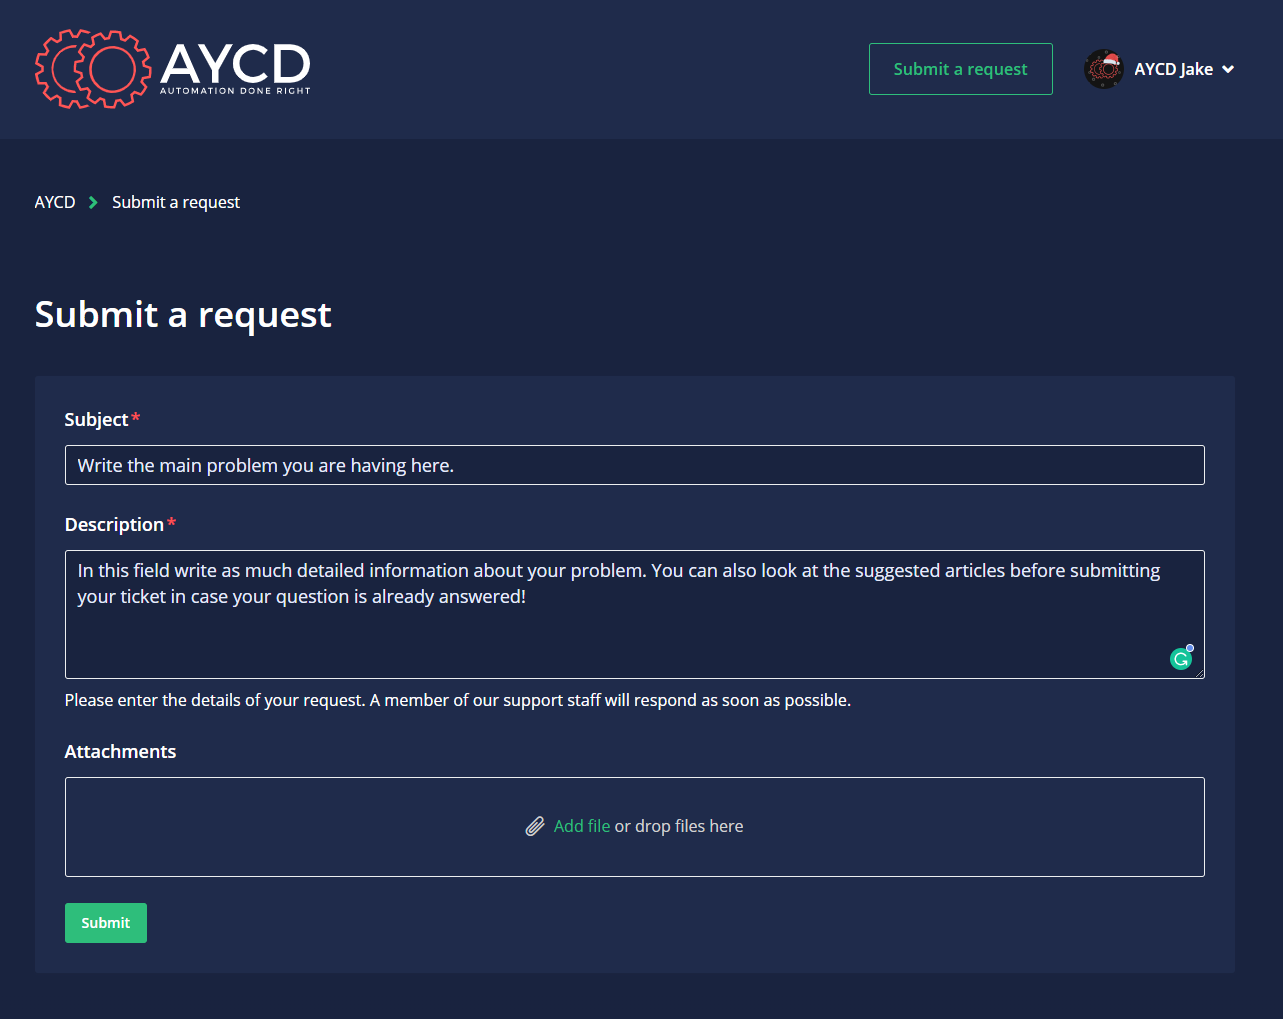 2019-12-14_16_56_11-Submit_a_request___AYCD.png